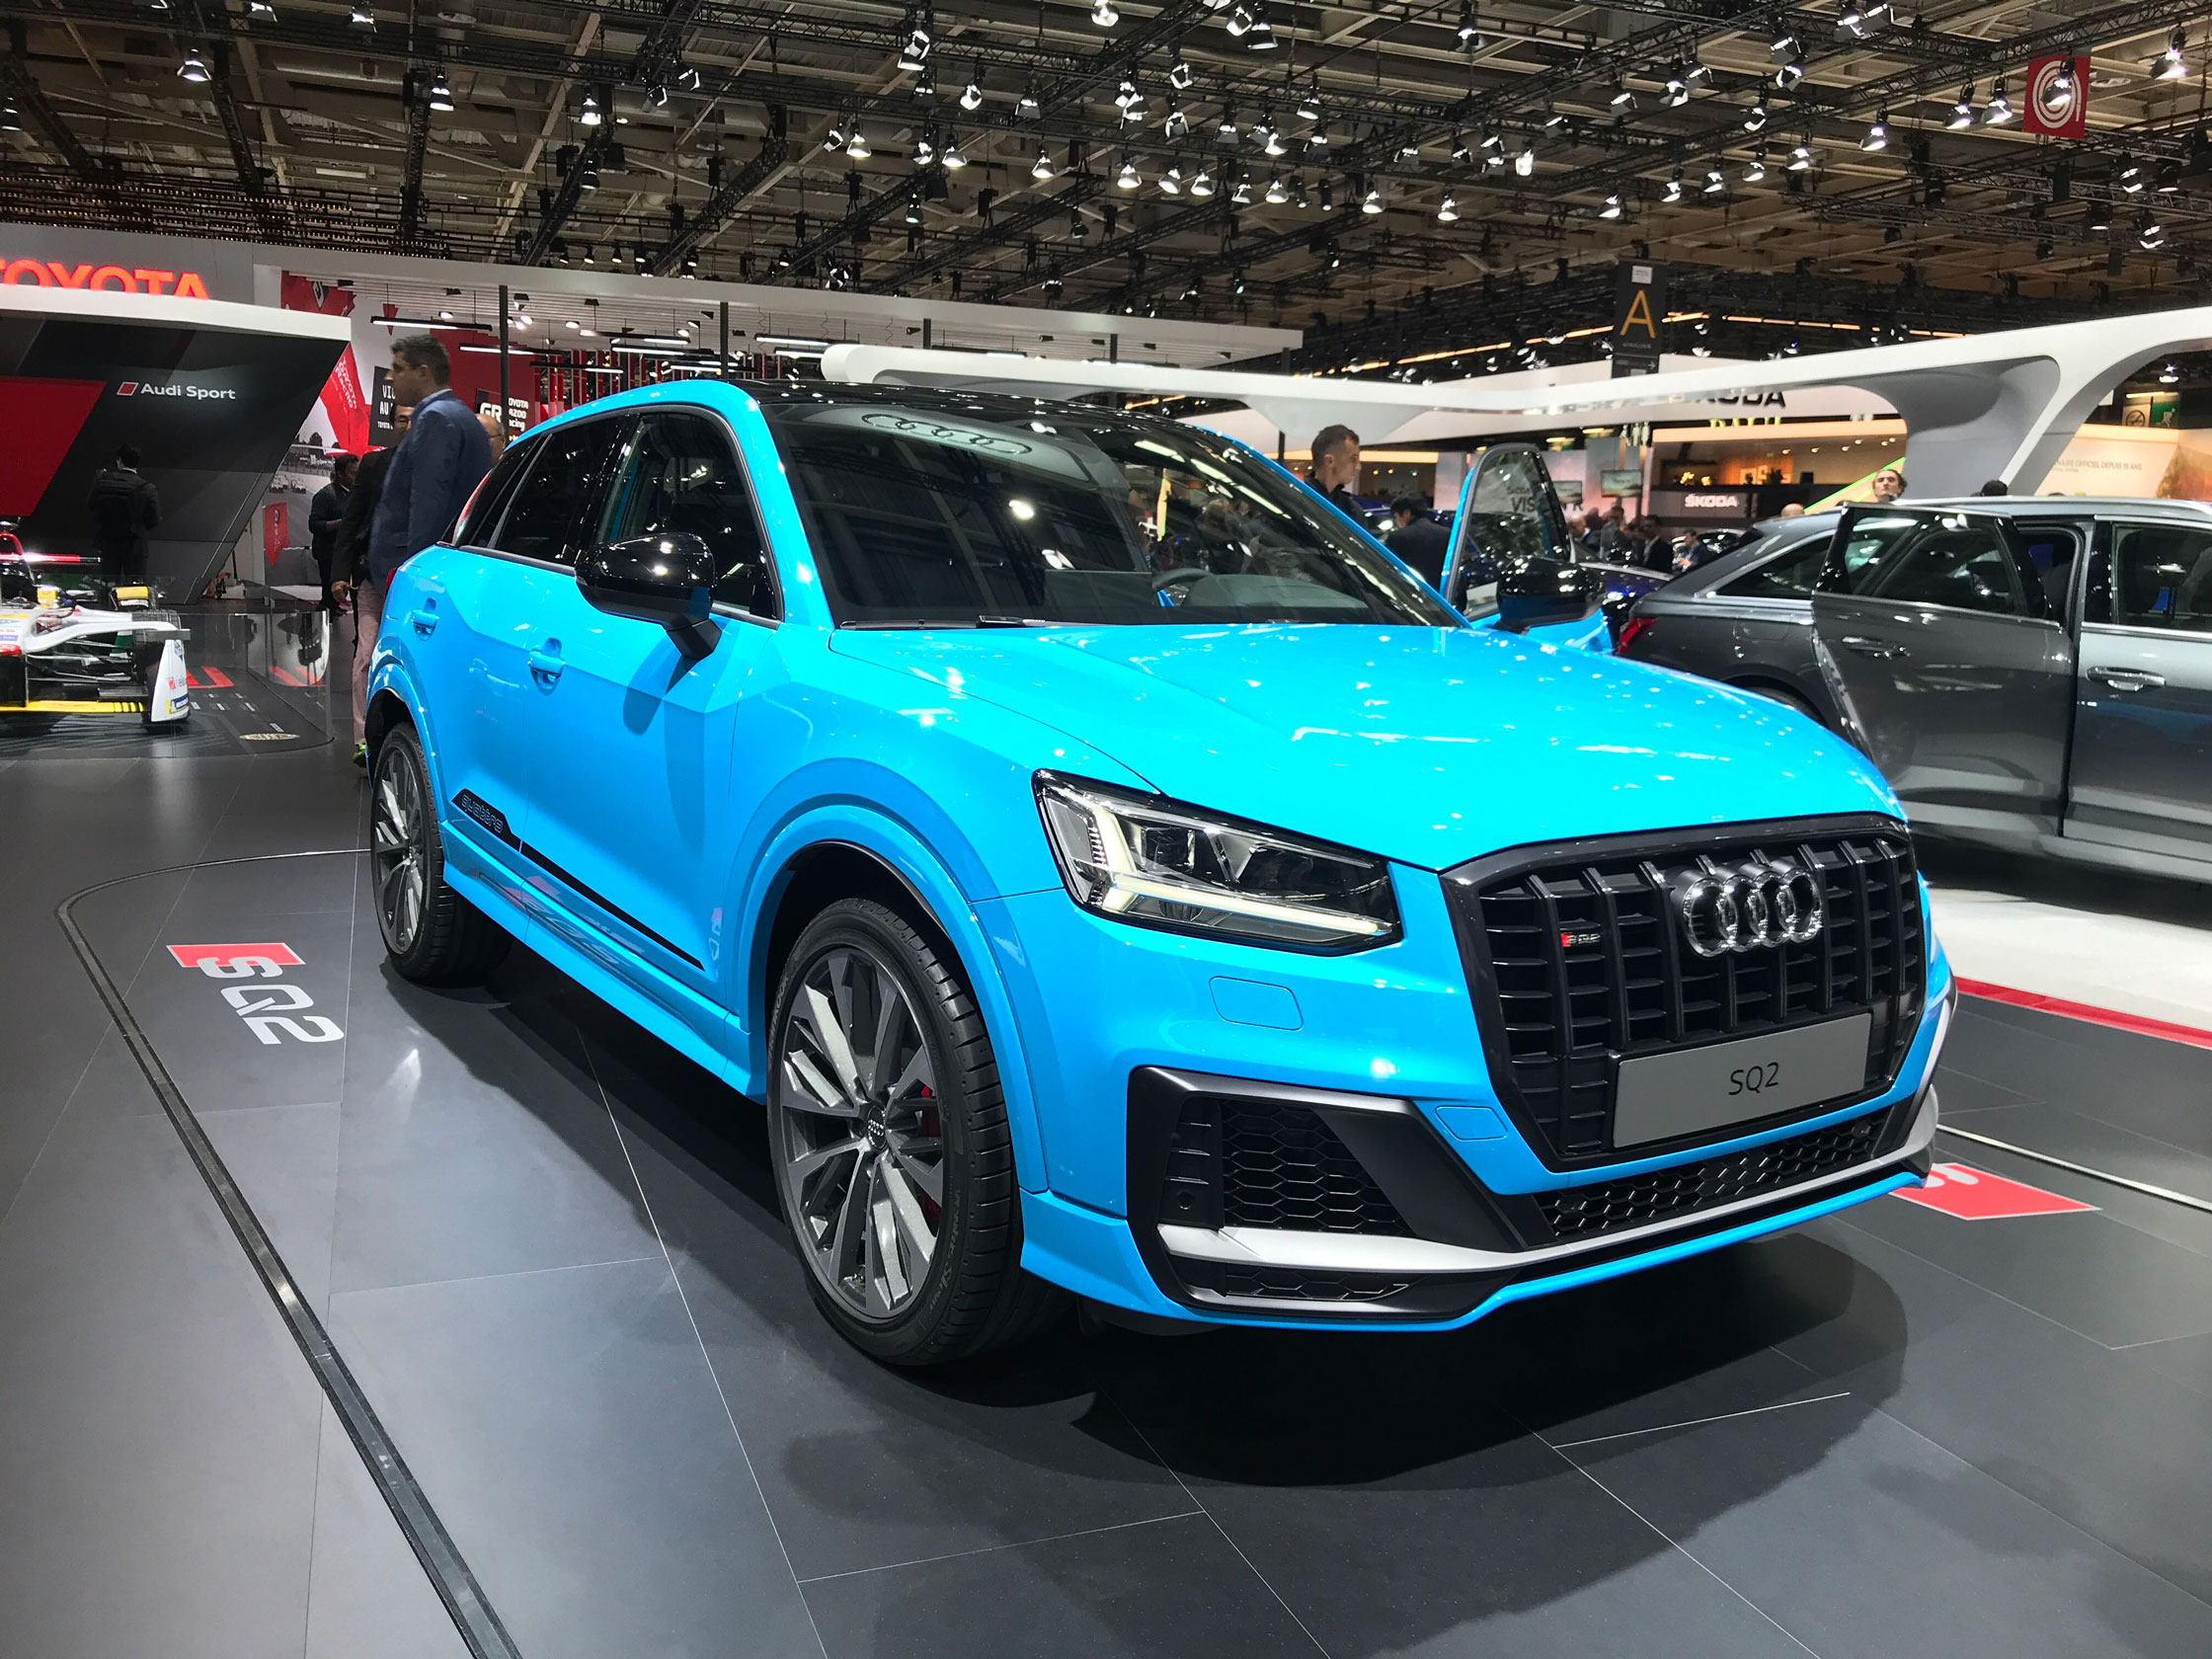 Audi Q2 review - prices, specs and 0-60 time